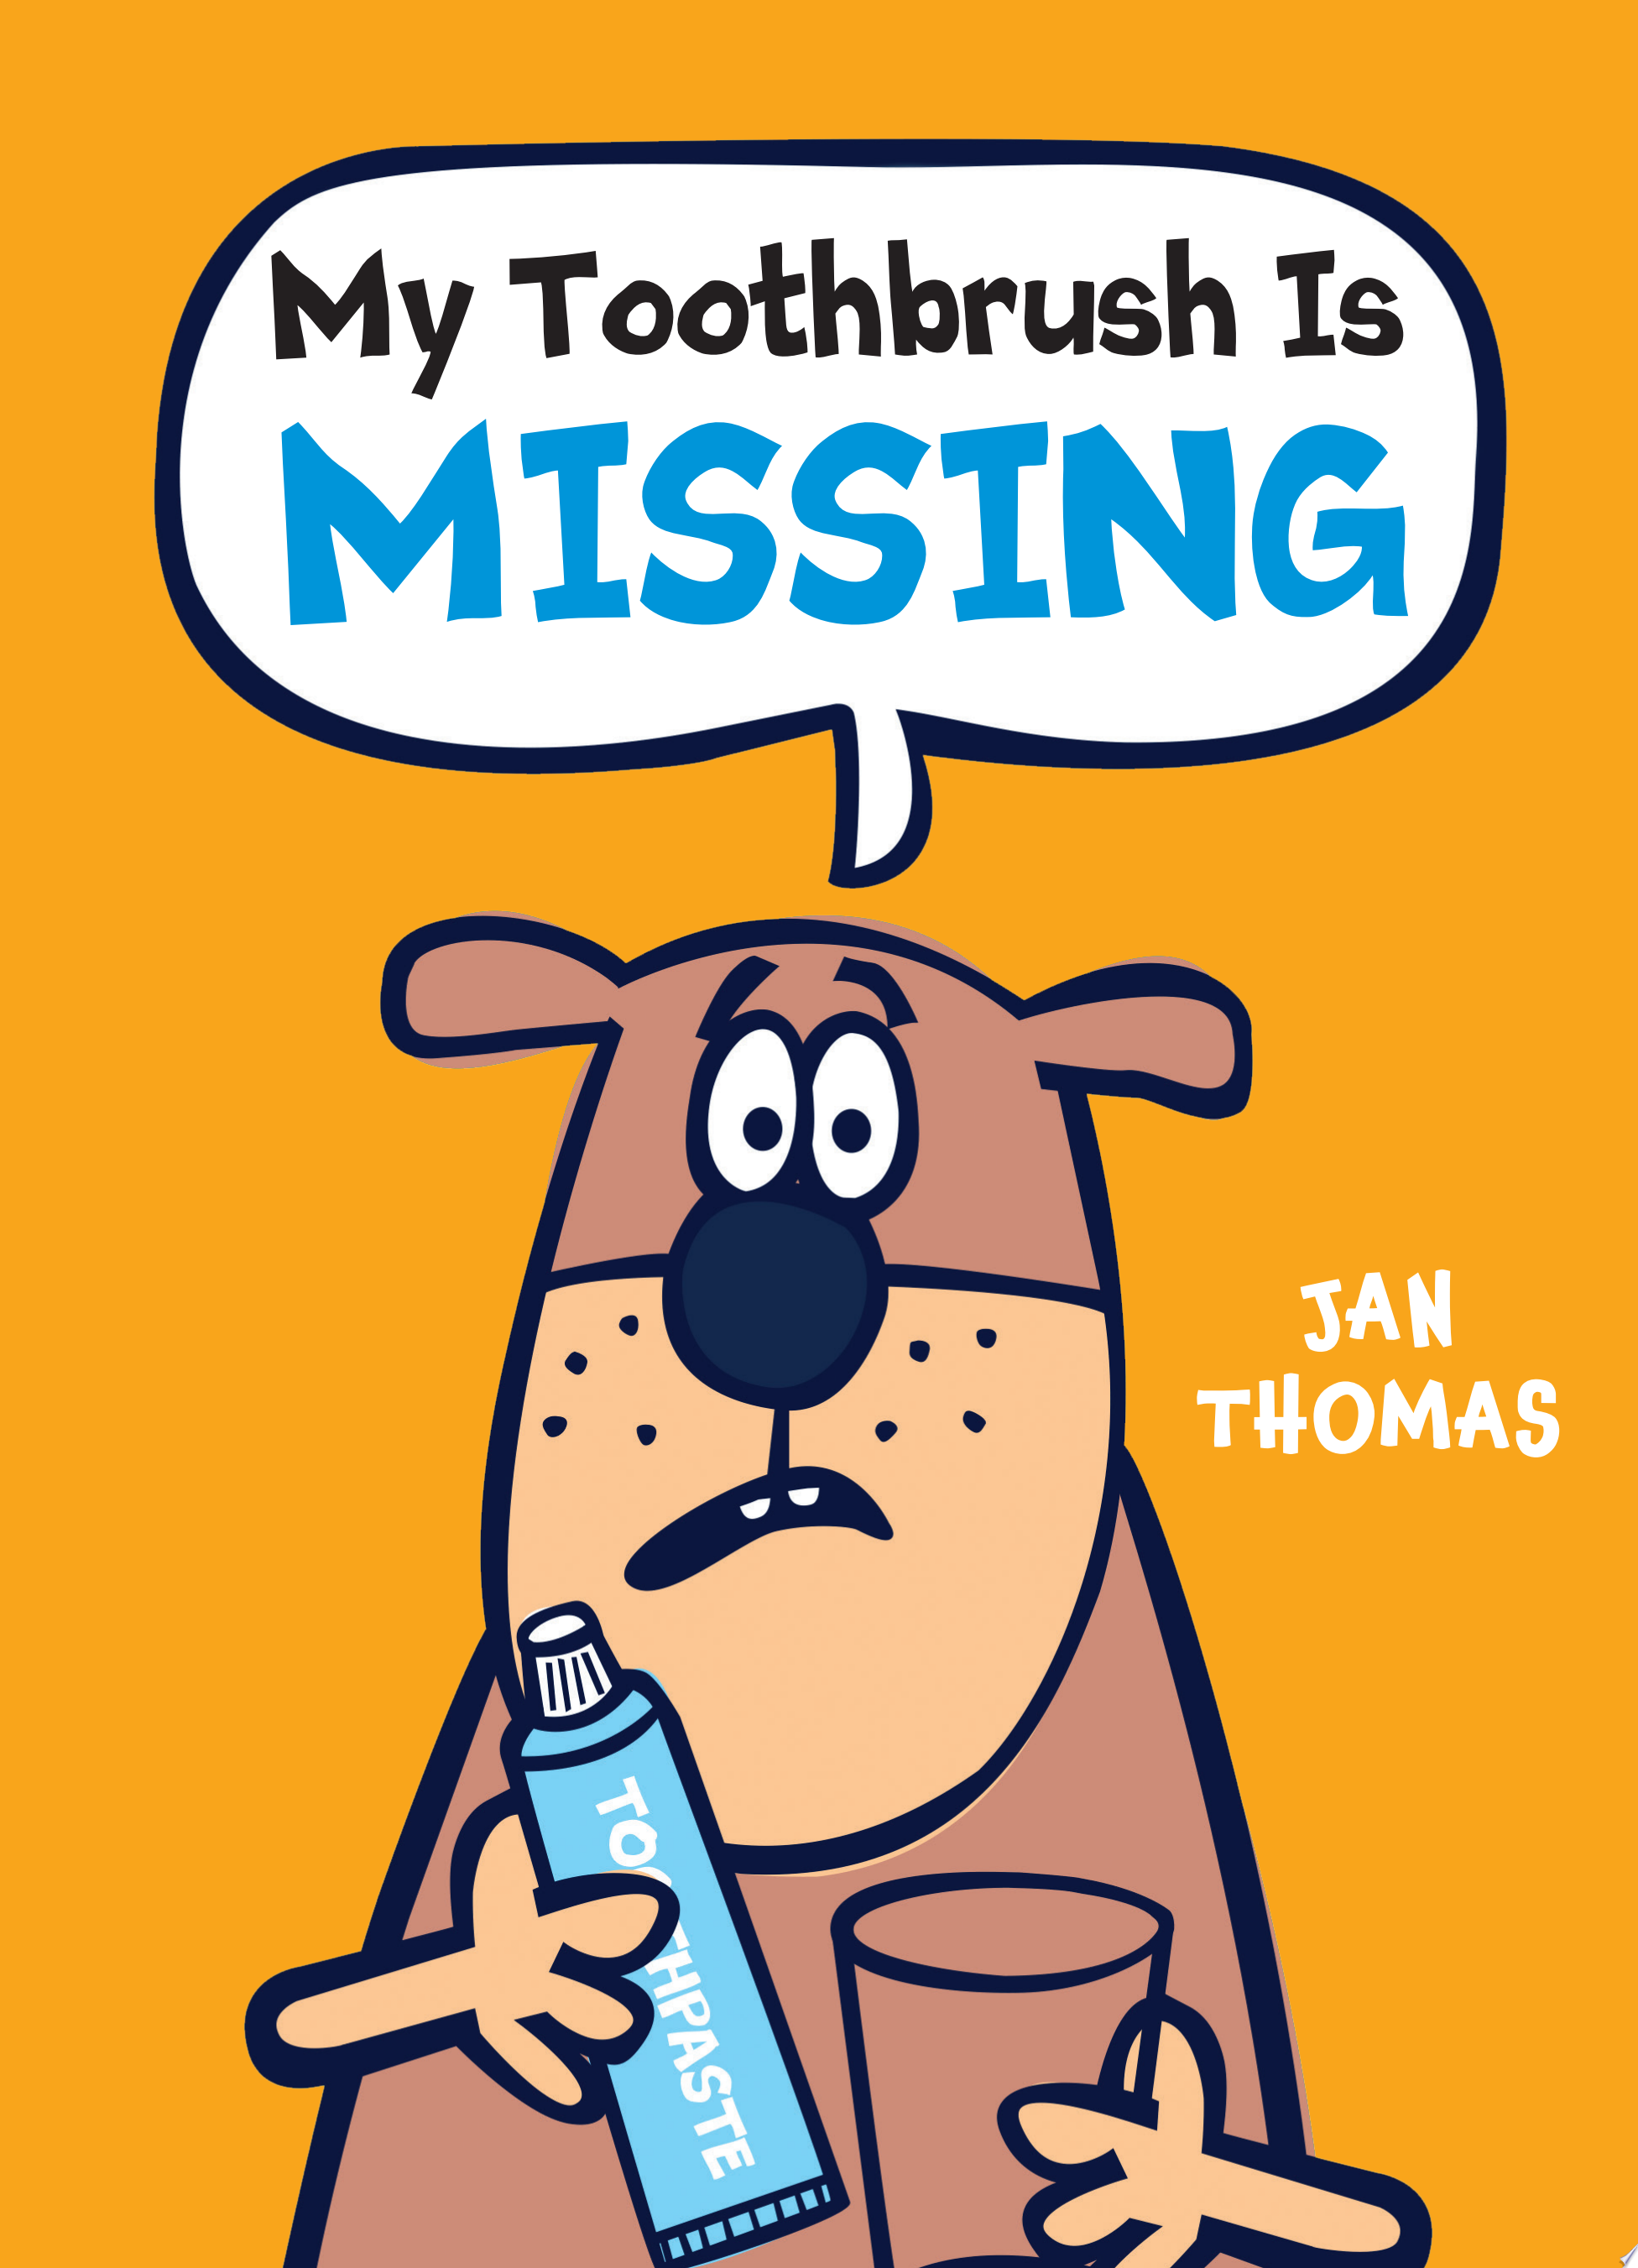 Image for "My Toothbrush Is Missing"